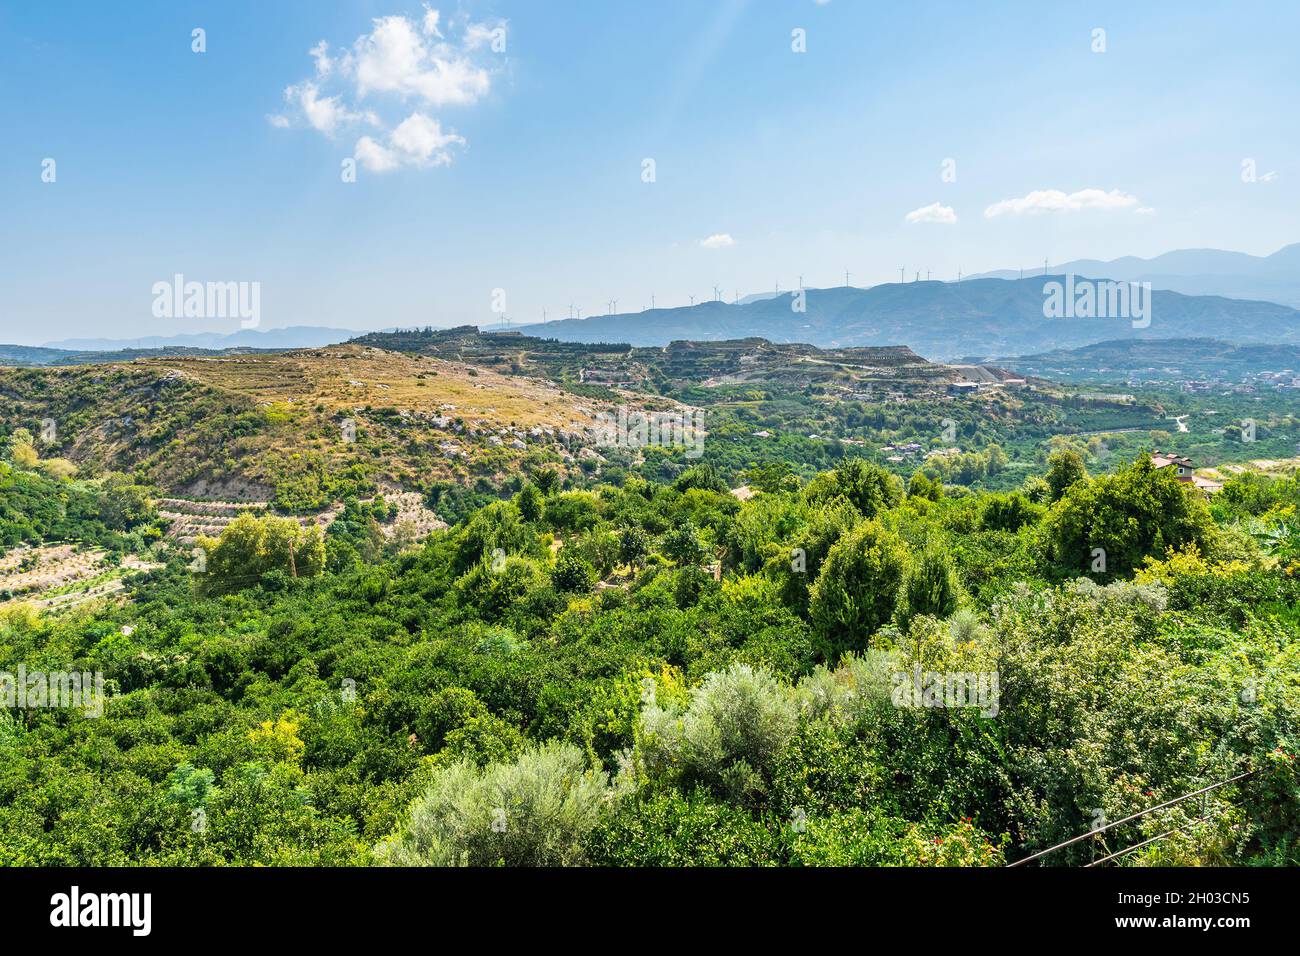 Hayat Vakifli Landscape Breathtaking Picturesque View on a Blue Sky Day in Summer Stock Photo